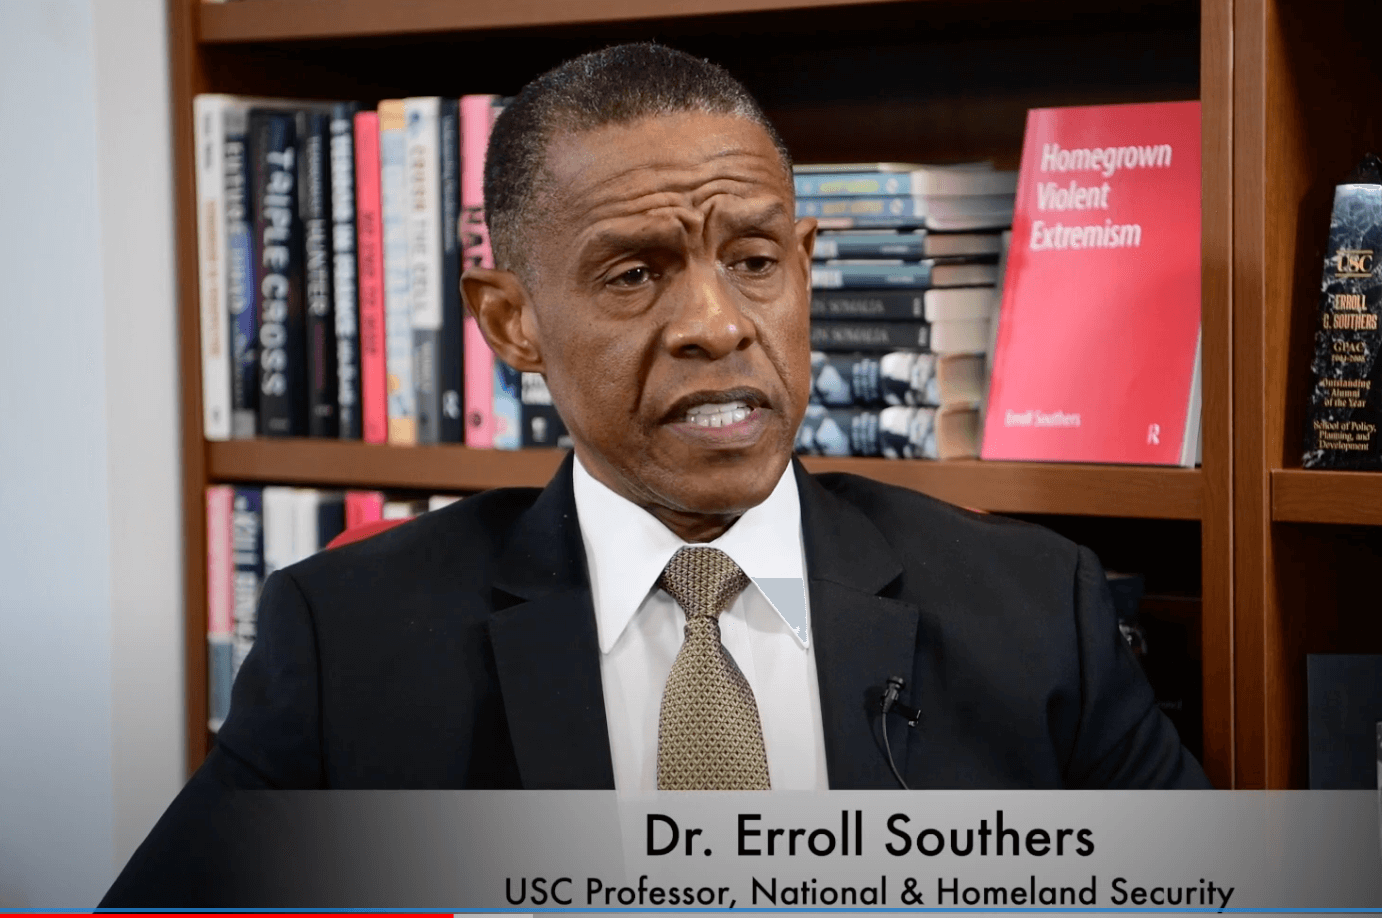 Dr. Erroll Southers